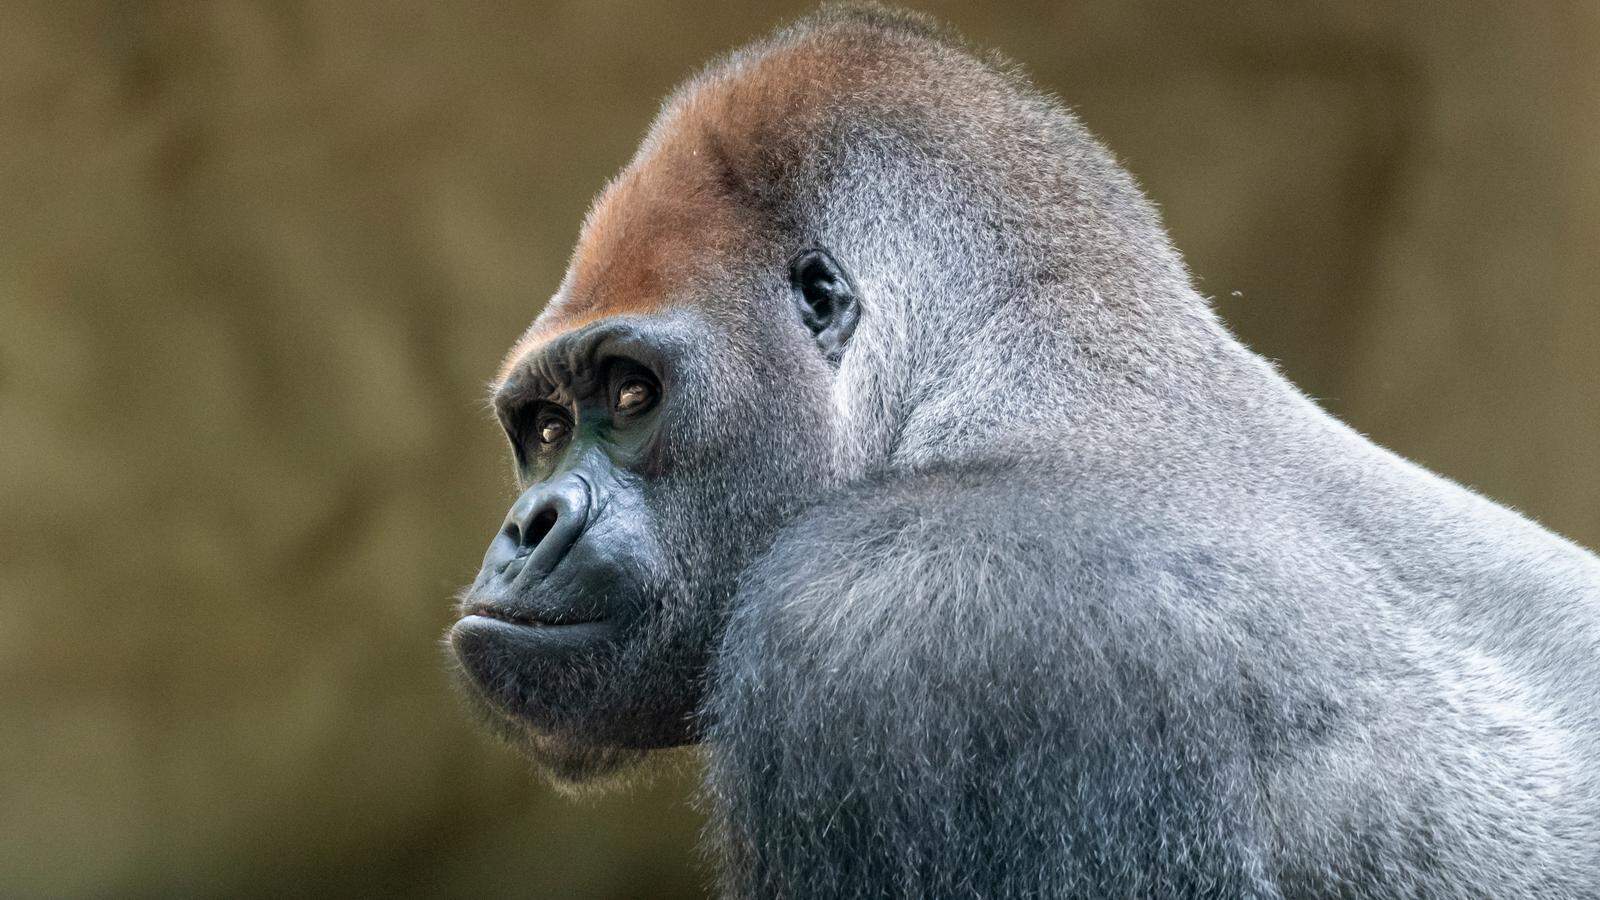 Xebo the gorilla dies at the Barcelona Zoo, endangered species